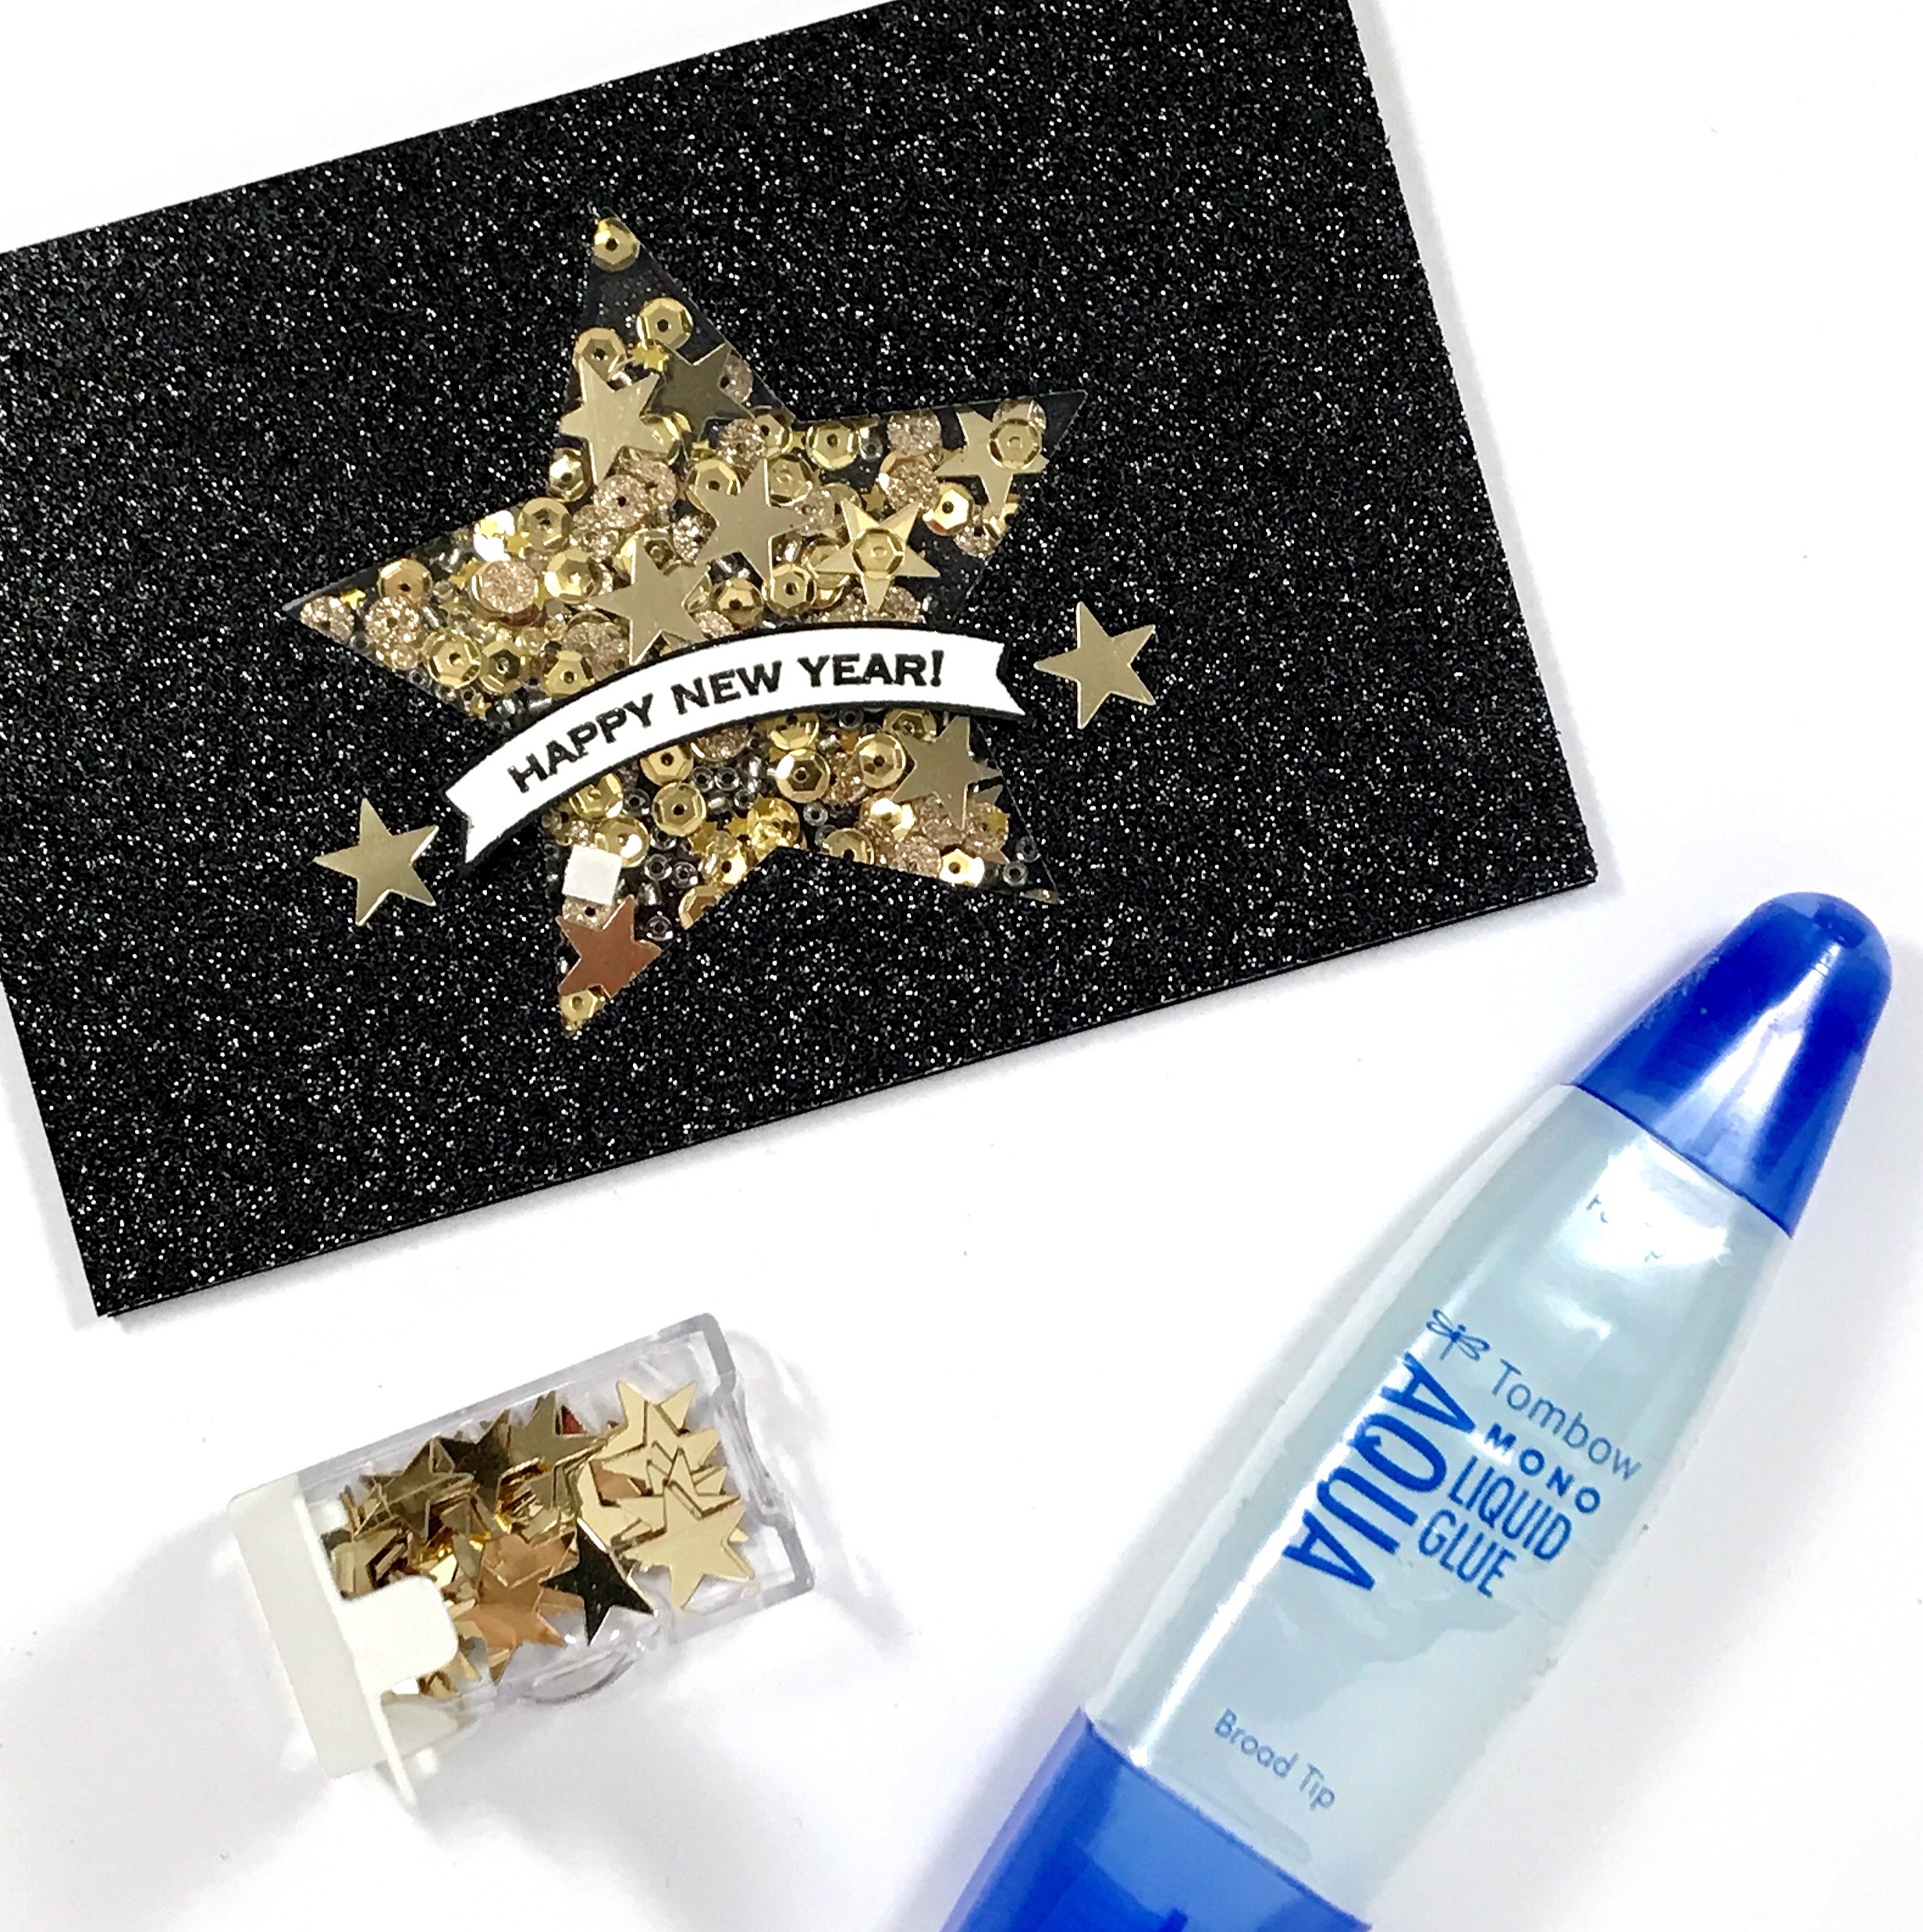 Glitter New Years Shaker Card with Tombow Adhesives with @tombowusa @popfizzpaper #pfplovestombow #tombowdt